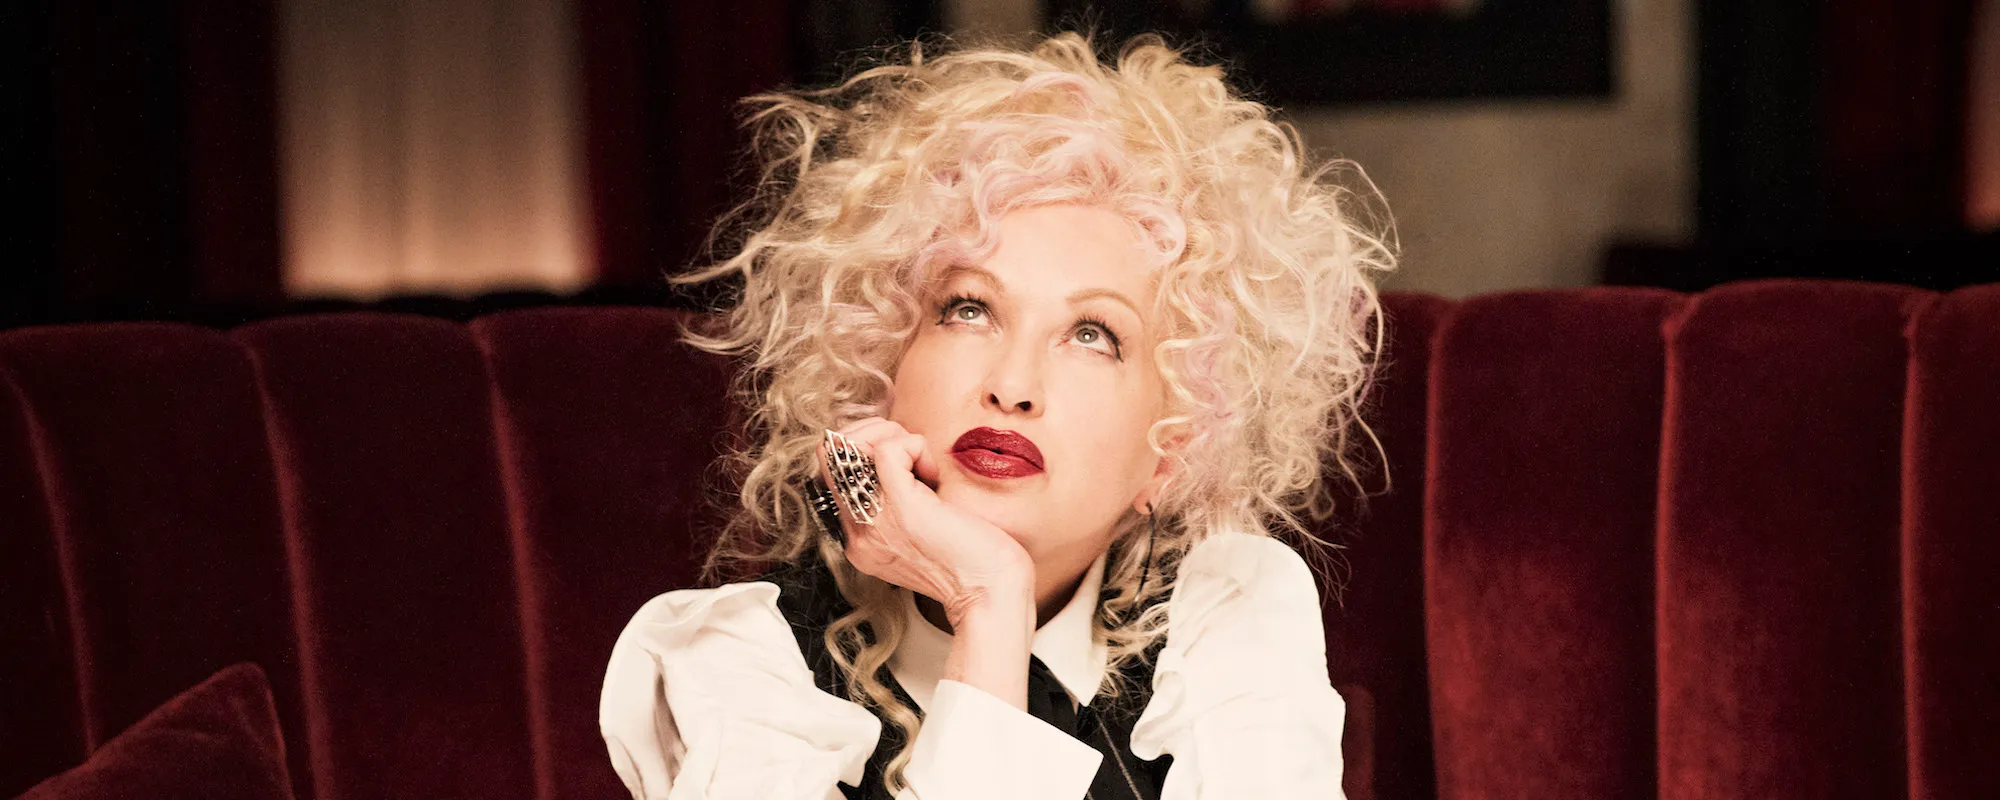 Cyndi Lauper Releases Acoustic Version of 1993 Abortion Rights Song “Sally’s Pigeons”